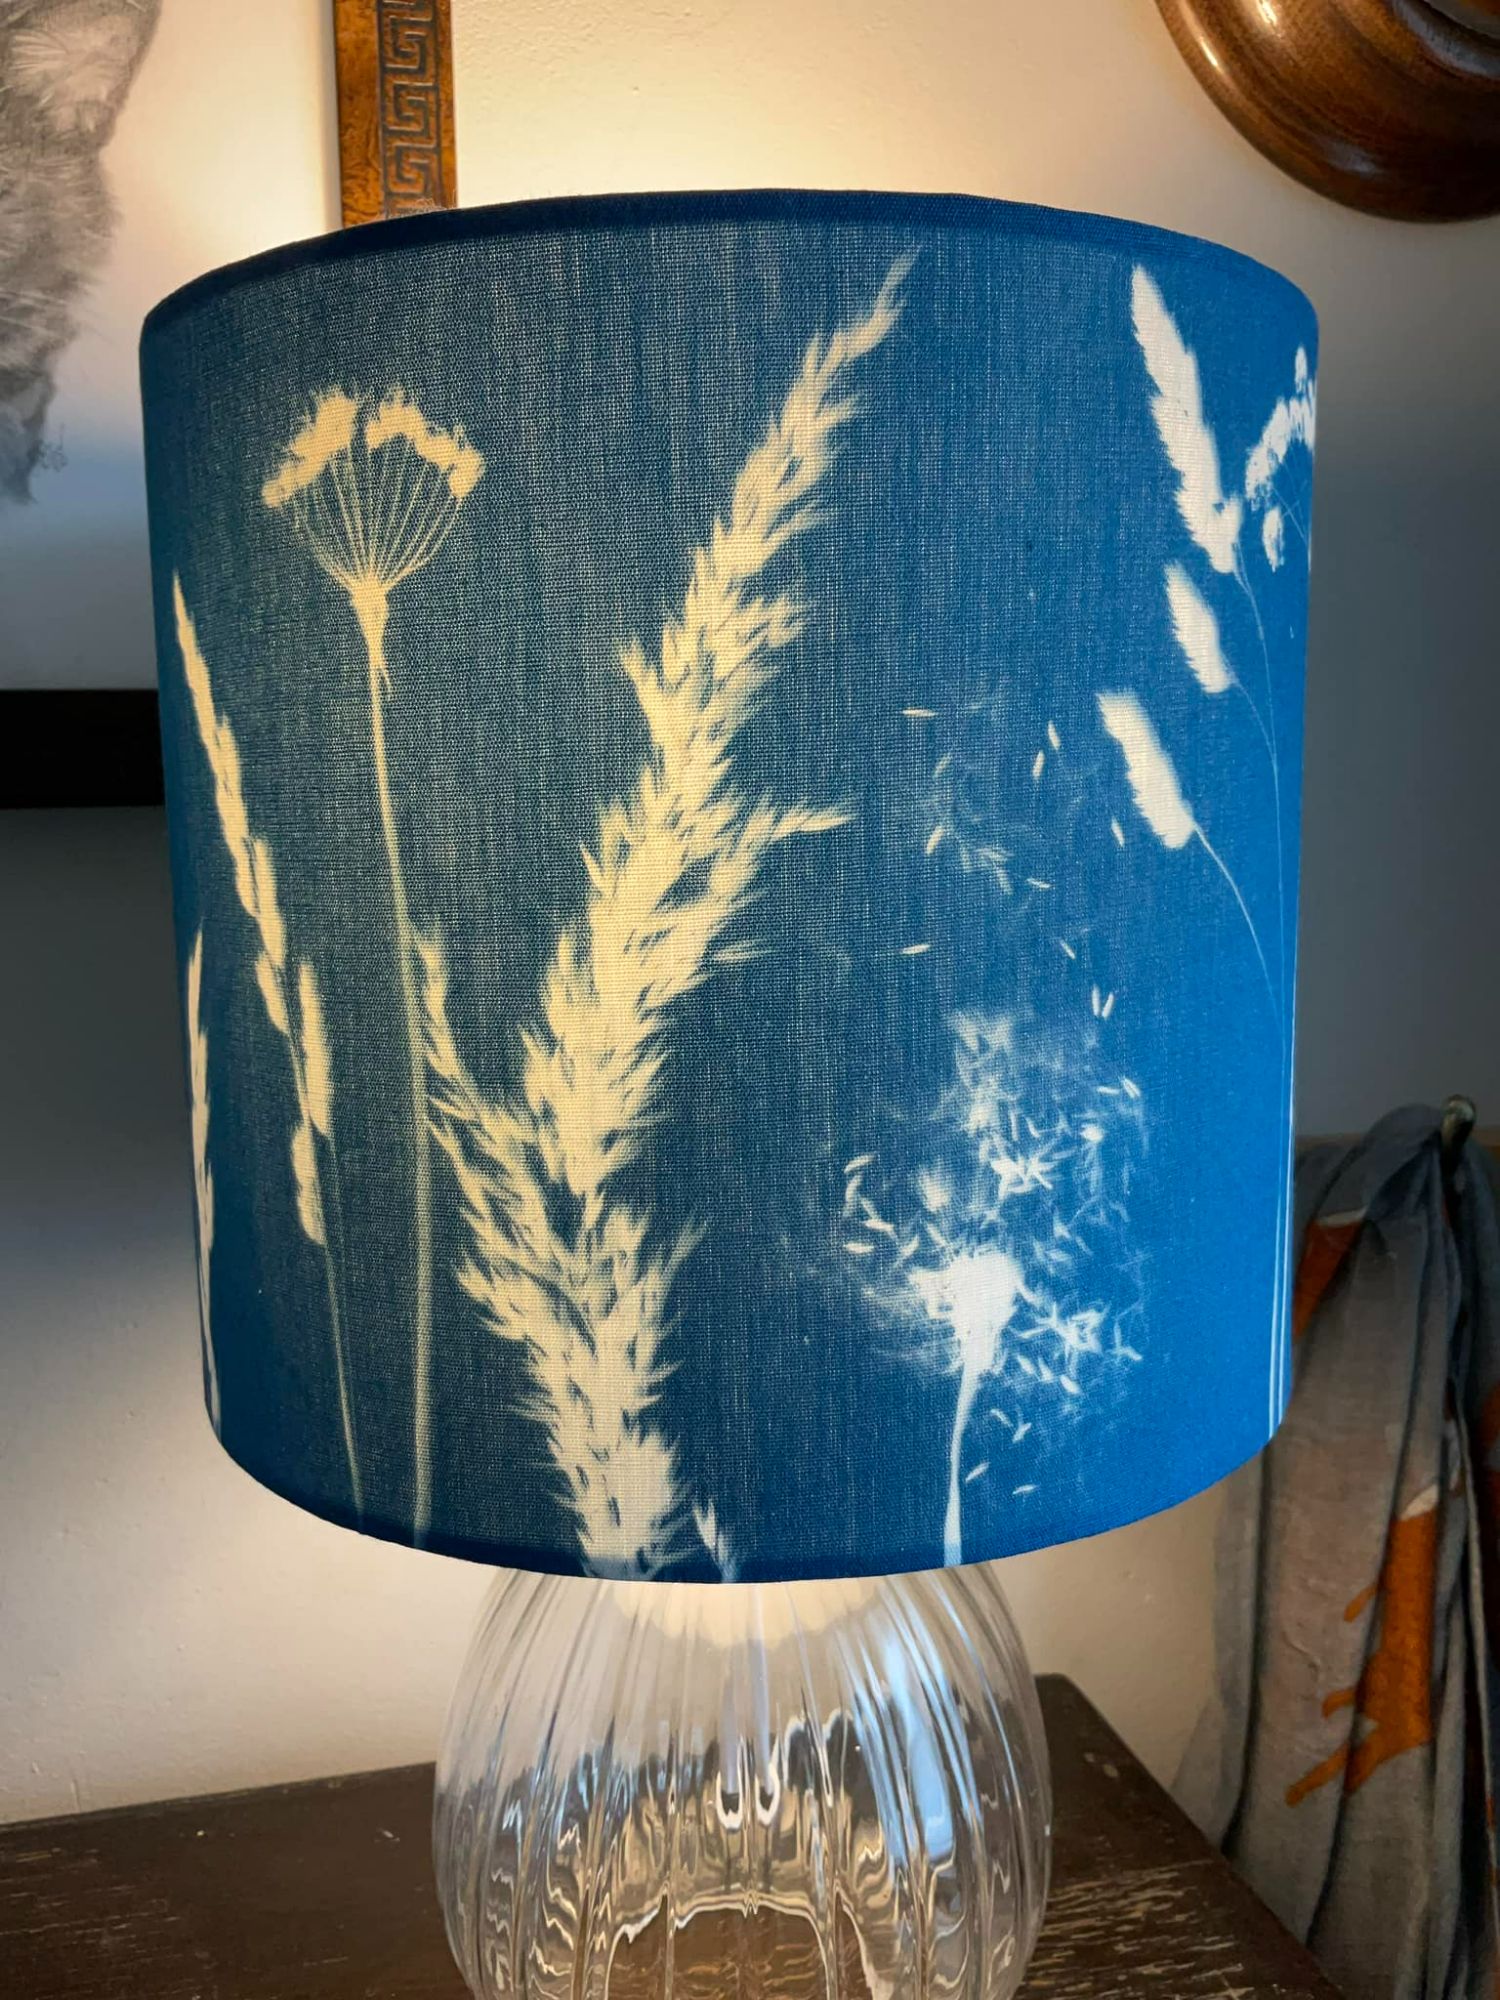 A blue cyanotype lampshade showing dandelions and grasses